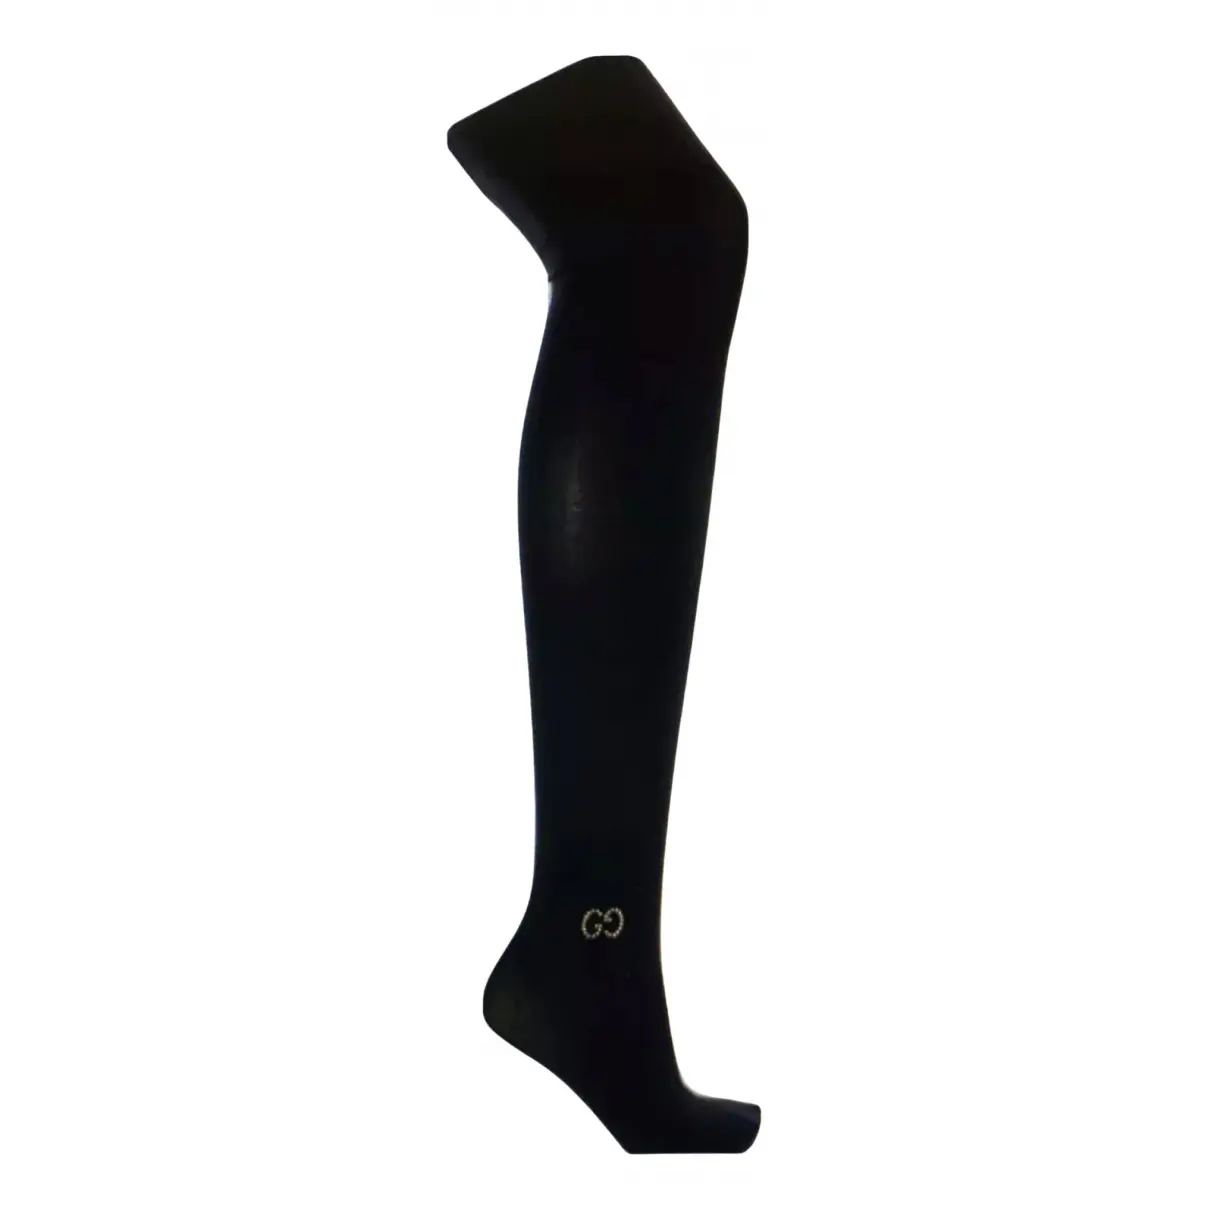 Buy Gucci Tight online